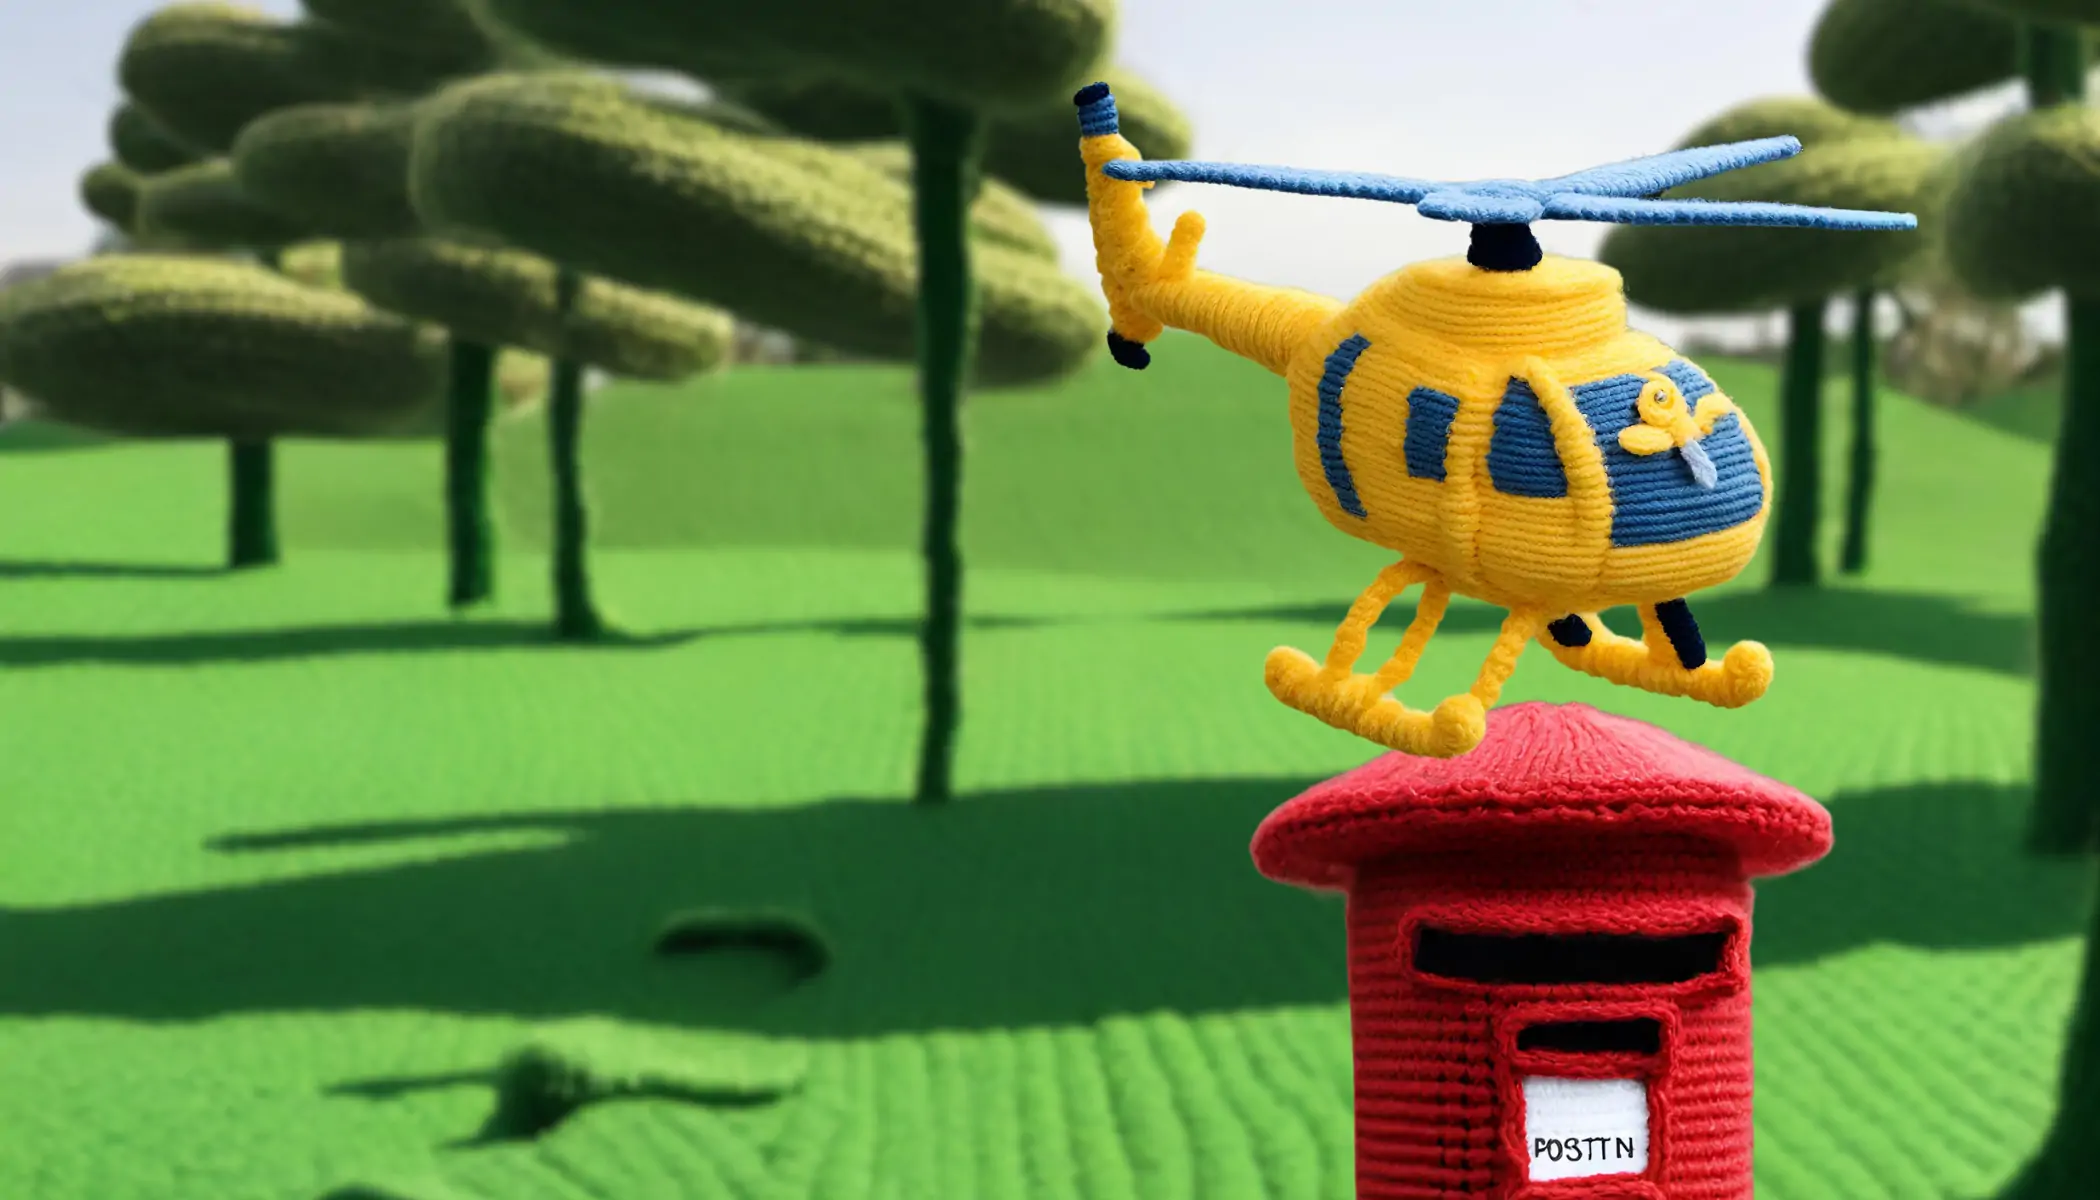 A knit yellow helicopter on knit postbox in a knitted field